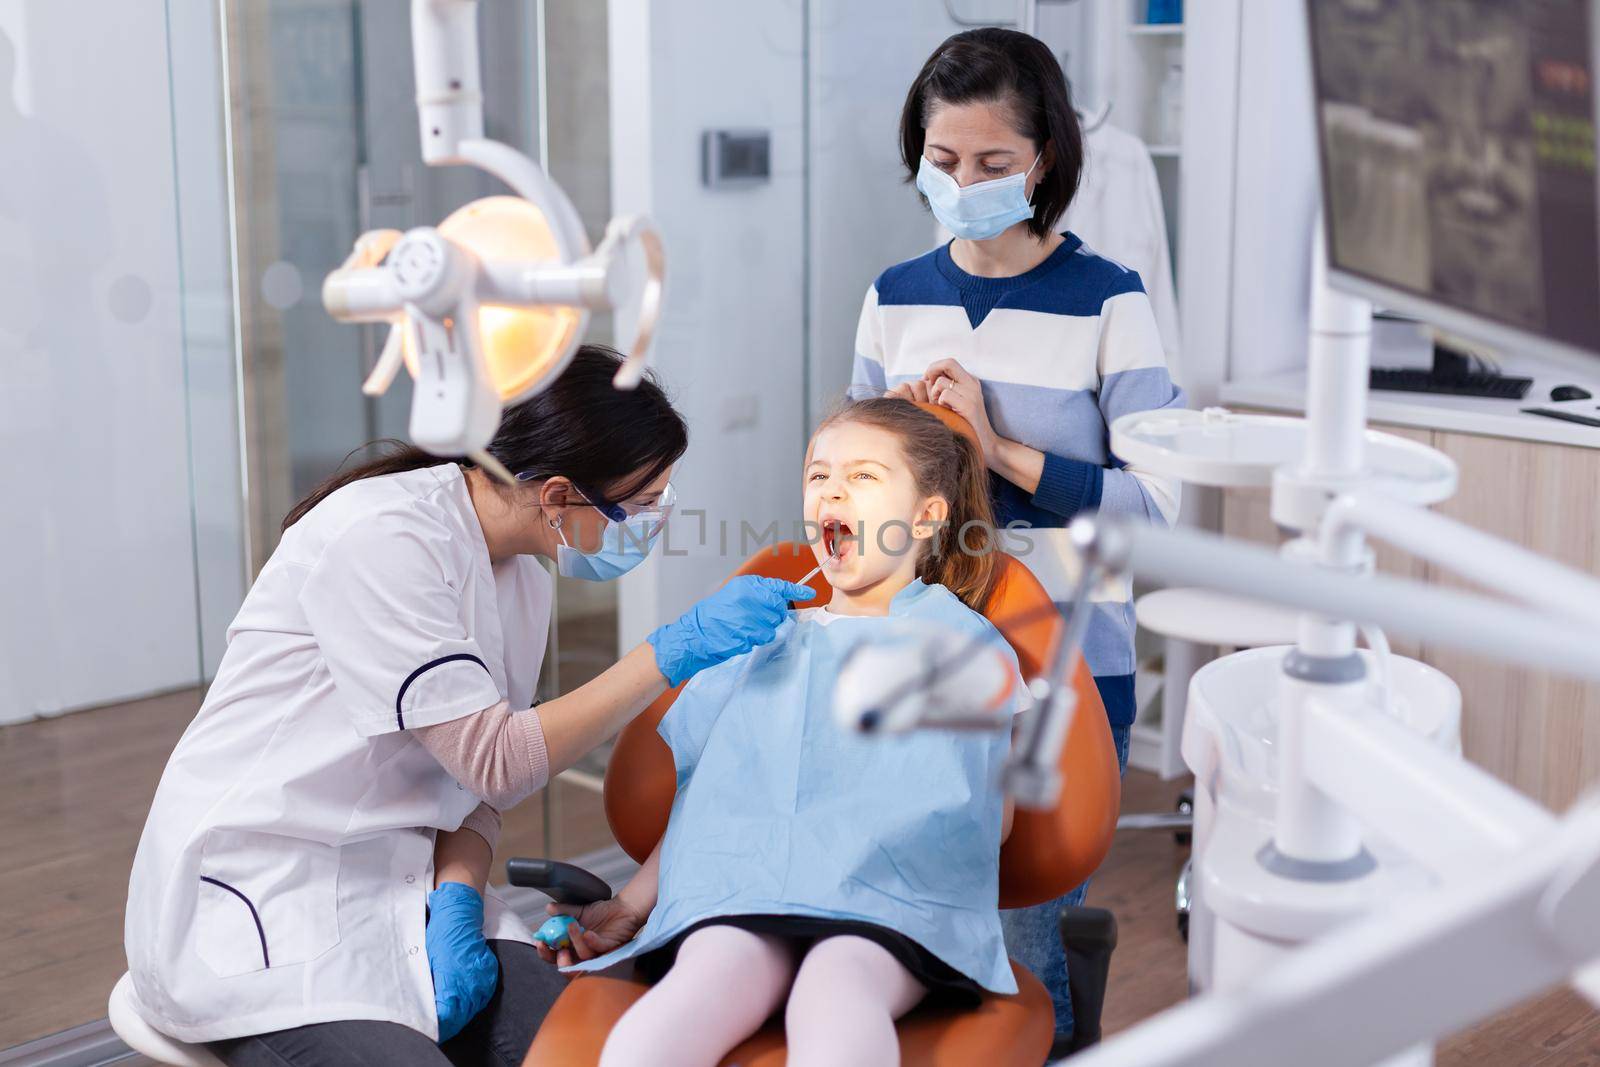 Little girl with open mouth in the course of cavity check up by DCStudio